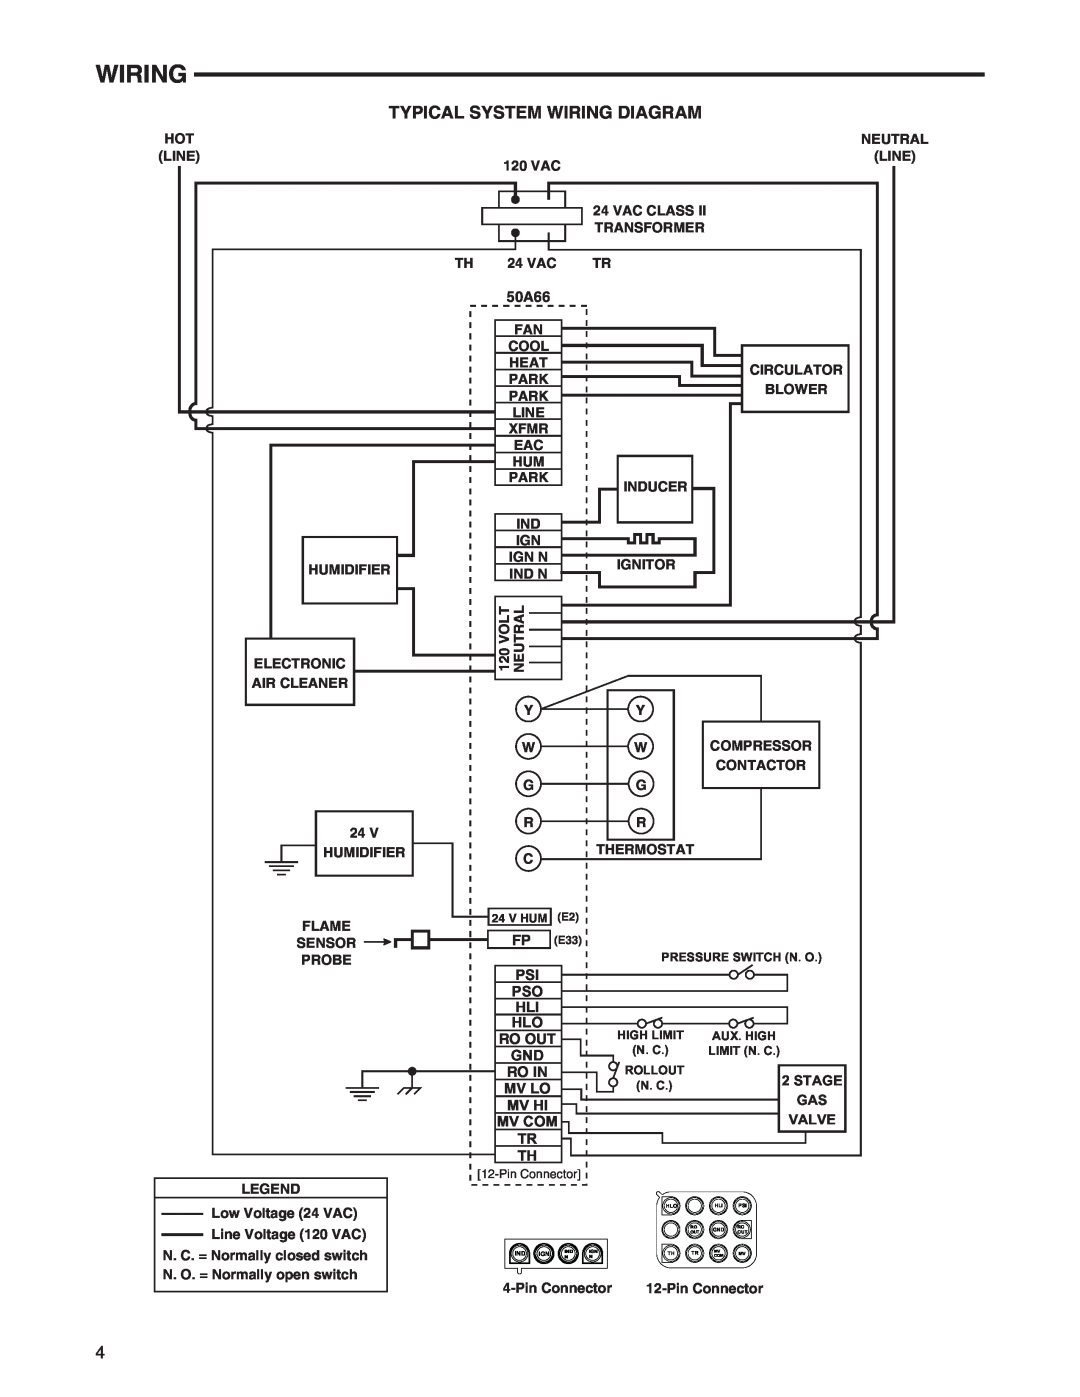 White Rodgers 50A66-743 installation instructions Typical System Wiring Diagram, Stage, Mv Hi 